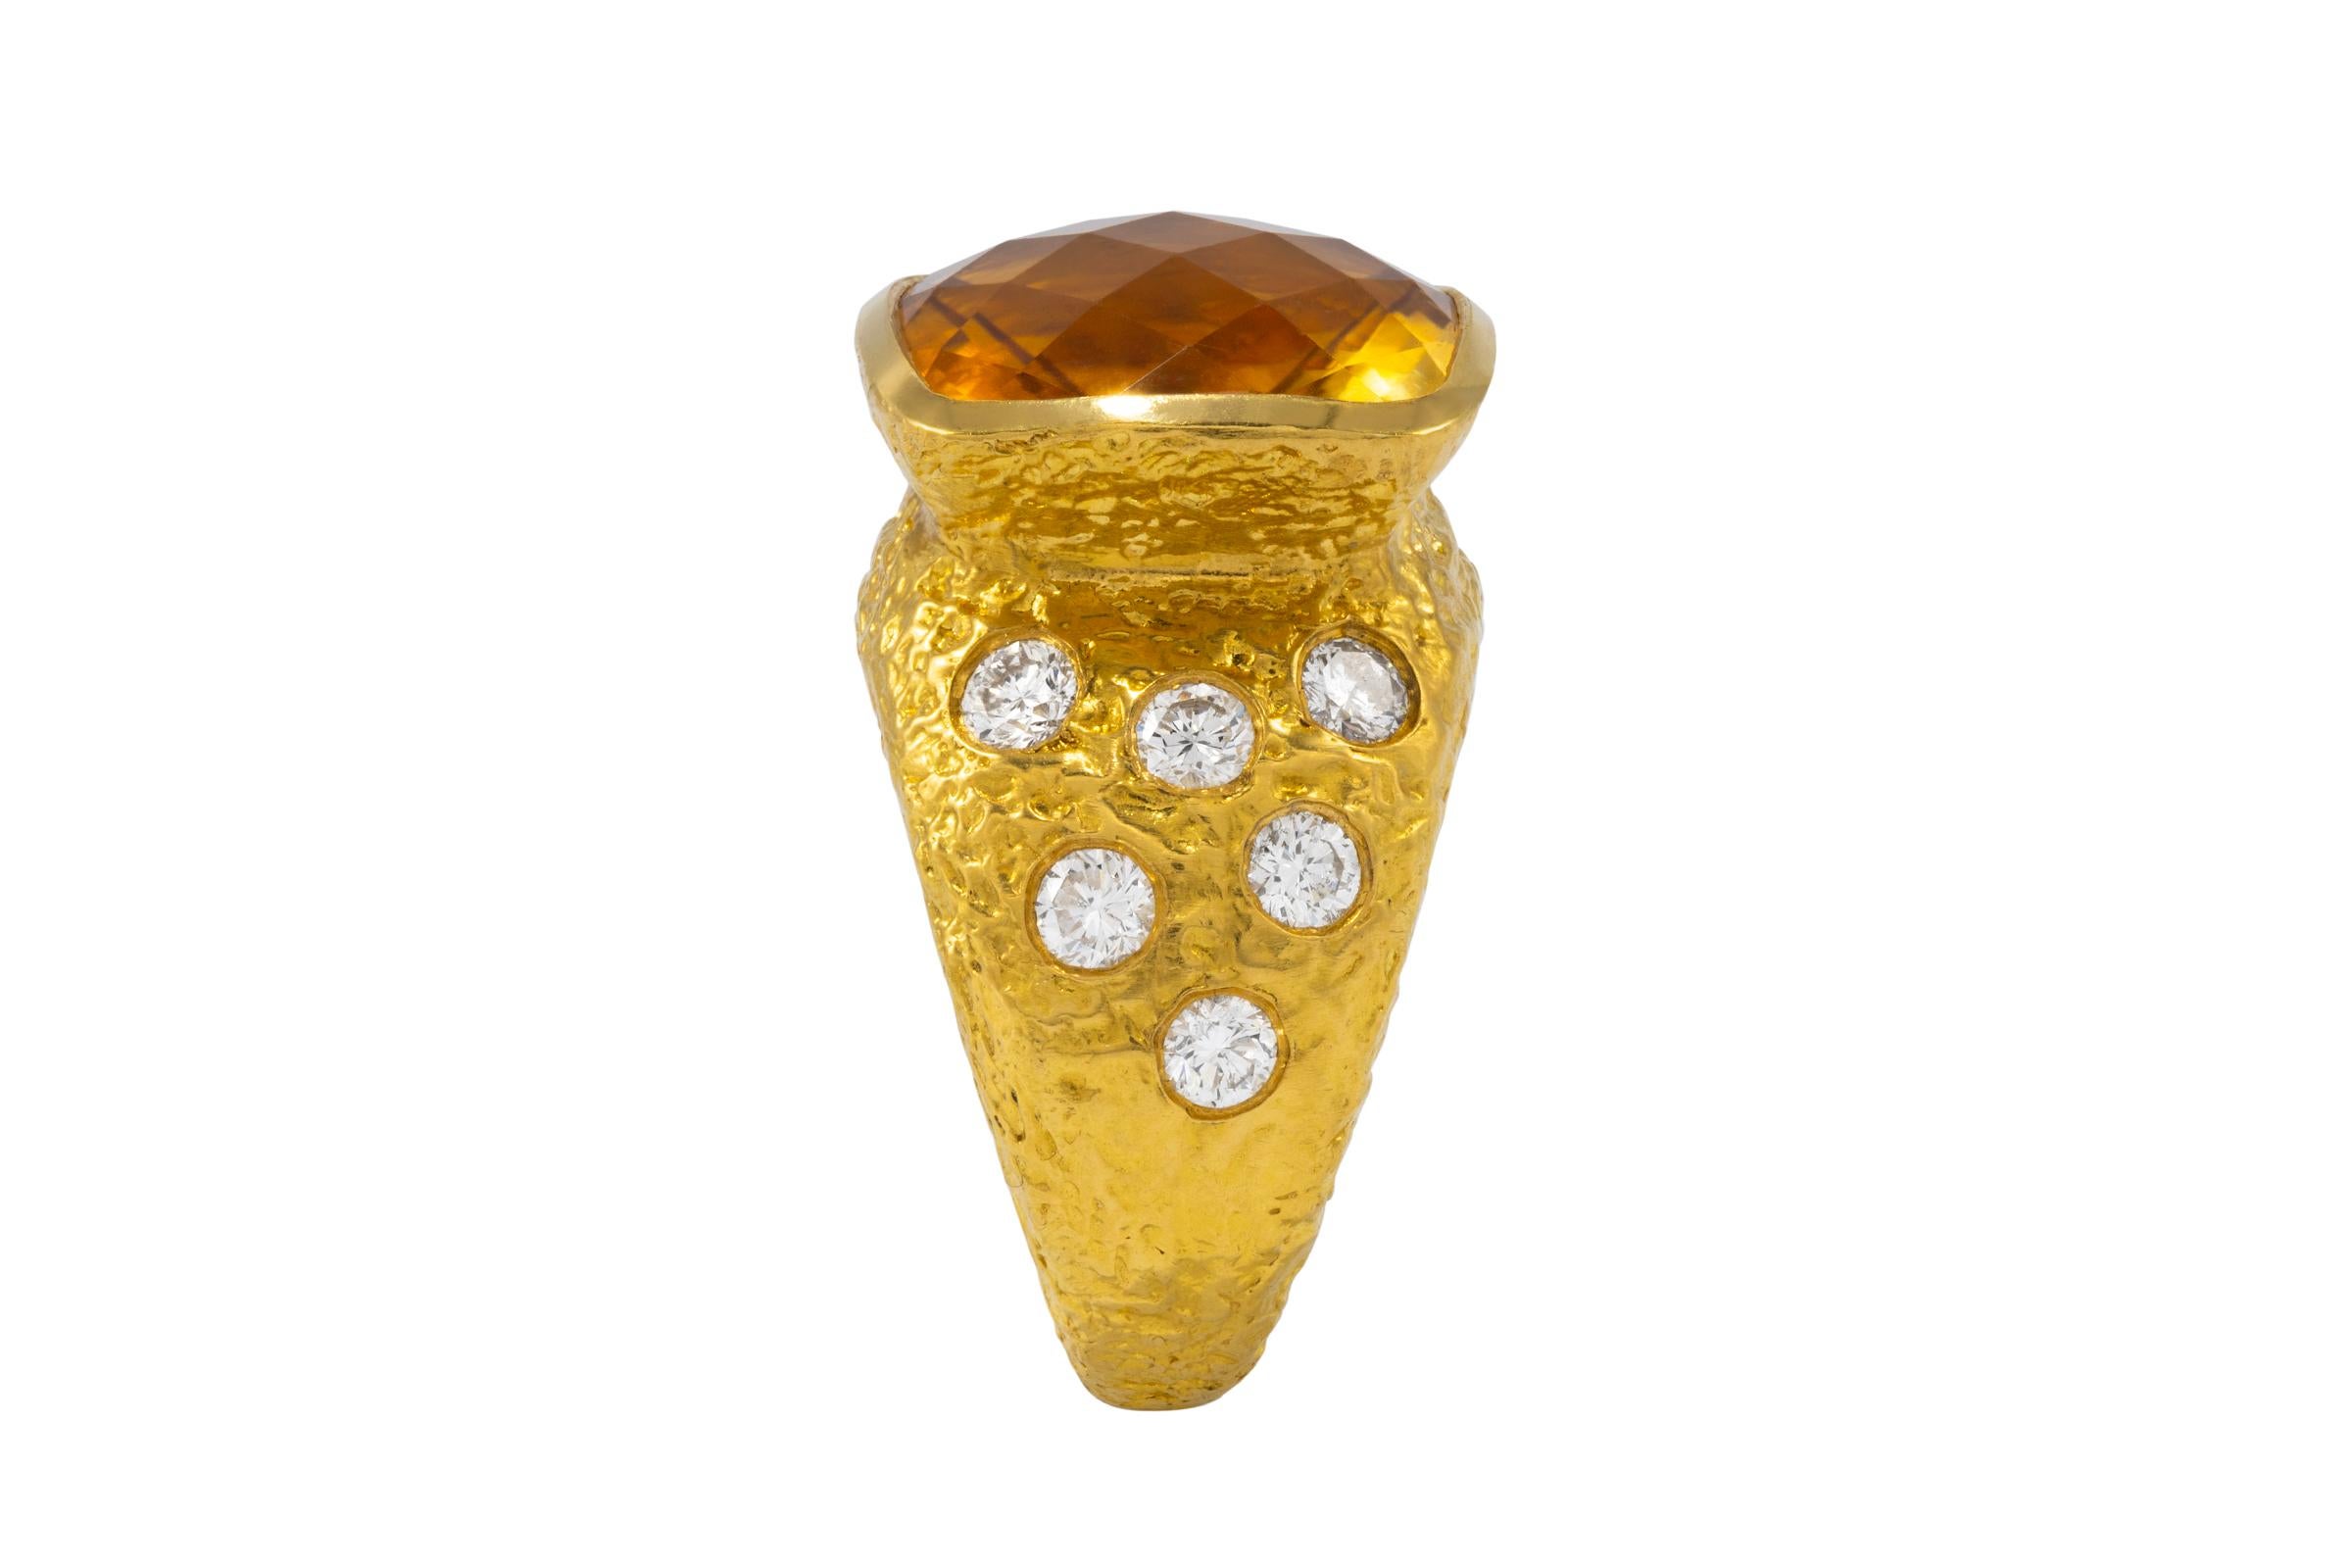 Brilliant Cut 22k Gold Citrine Birthstone Cocktail Ring with Diamonds, by Tagili For Sale